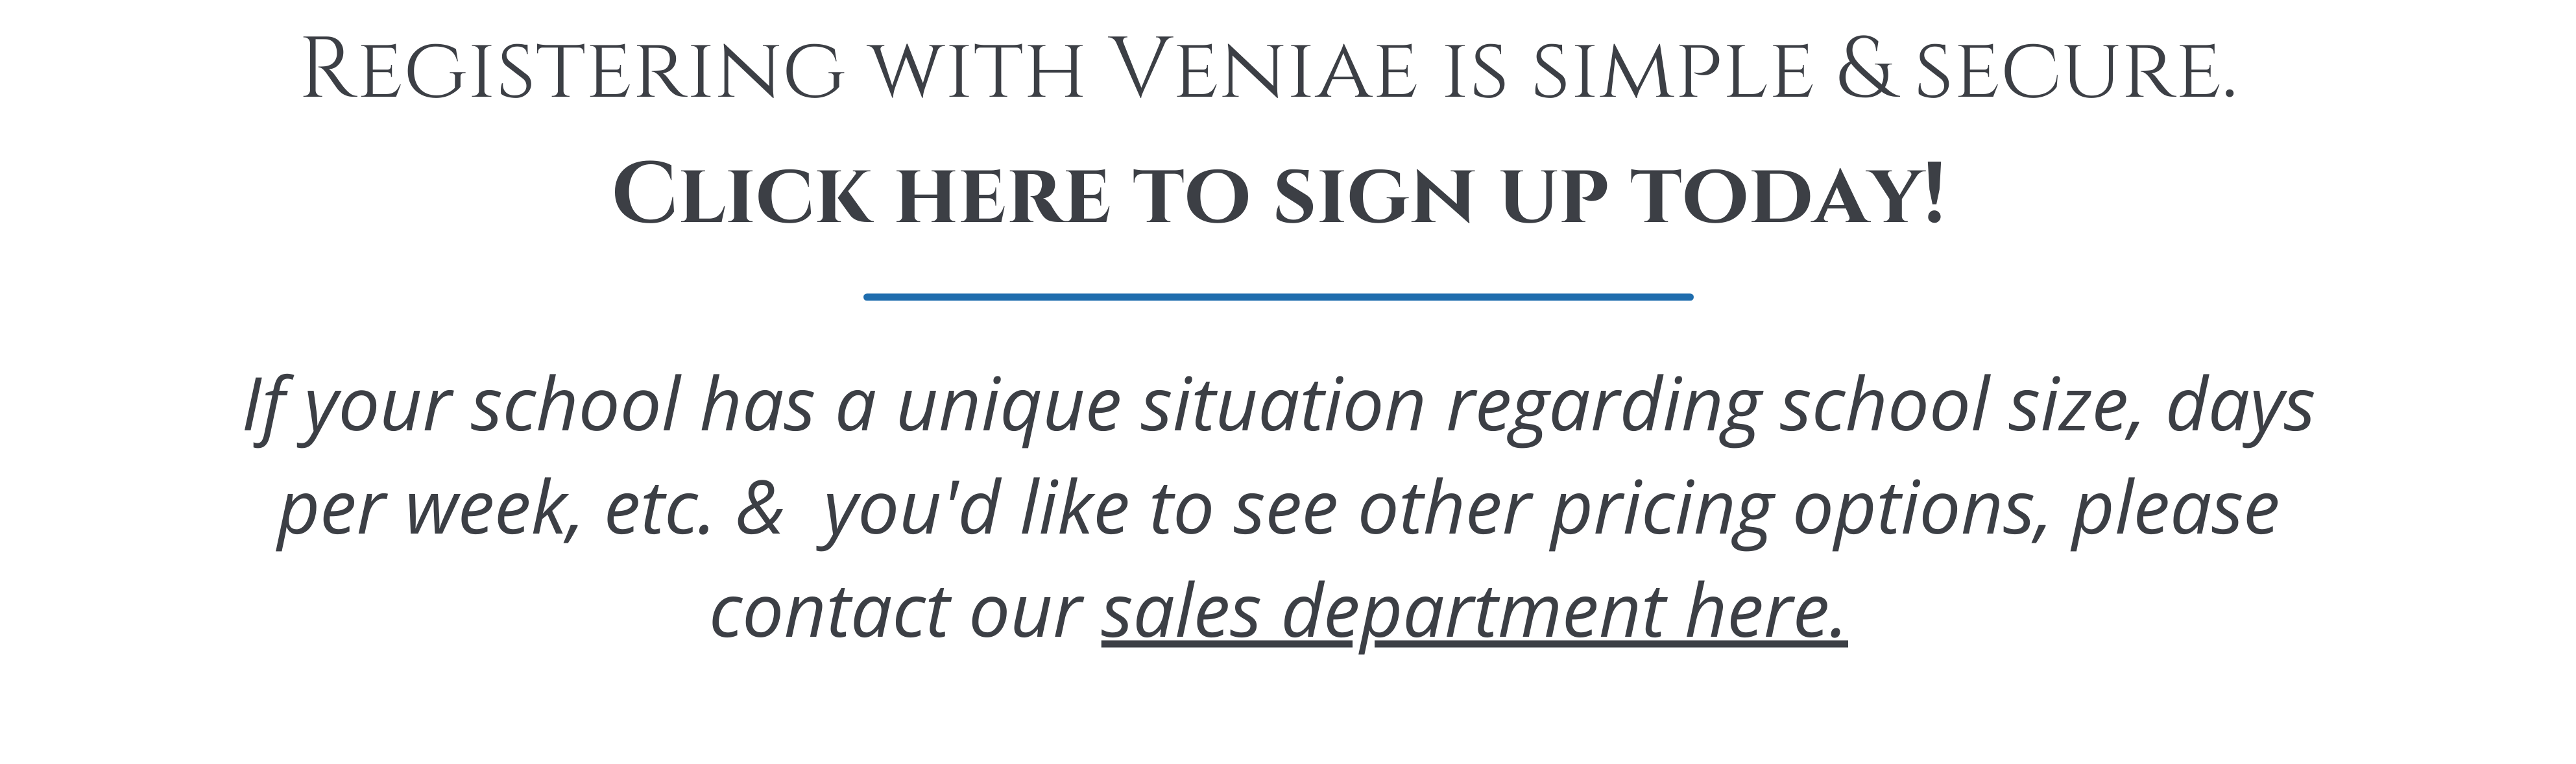 Registering with Veniae is easy and secure